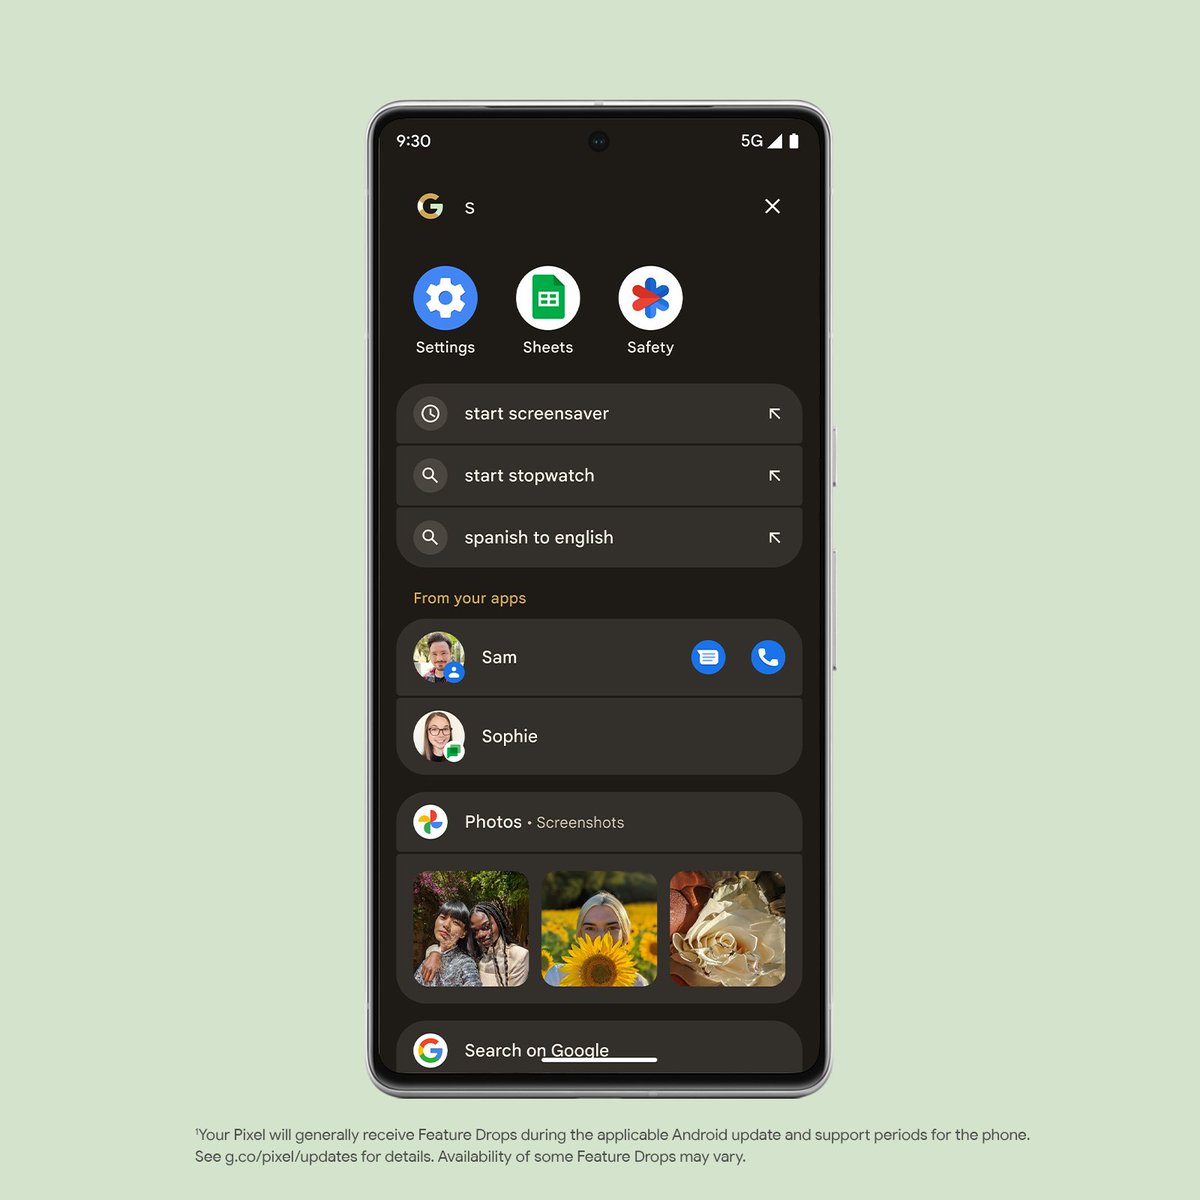 Finding something on your phone or the internet just got easier with Pixel’s latest #FeatureDrop.¹

Navigate to apps, find conversations, get answers, and even take actions within apps—all with just one quick search. 🔍

Learn more: goo.gle/featdropdec22